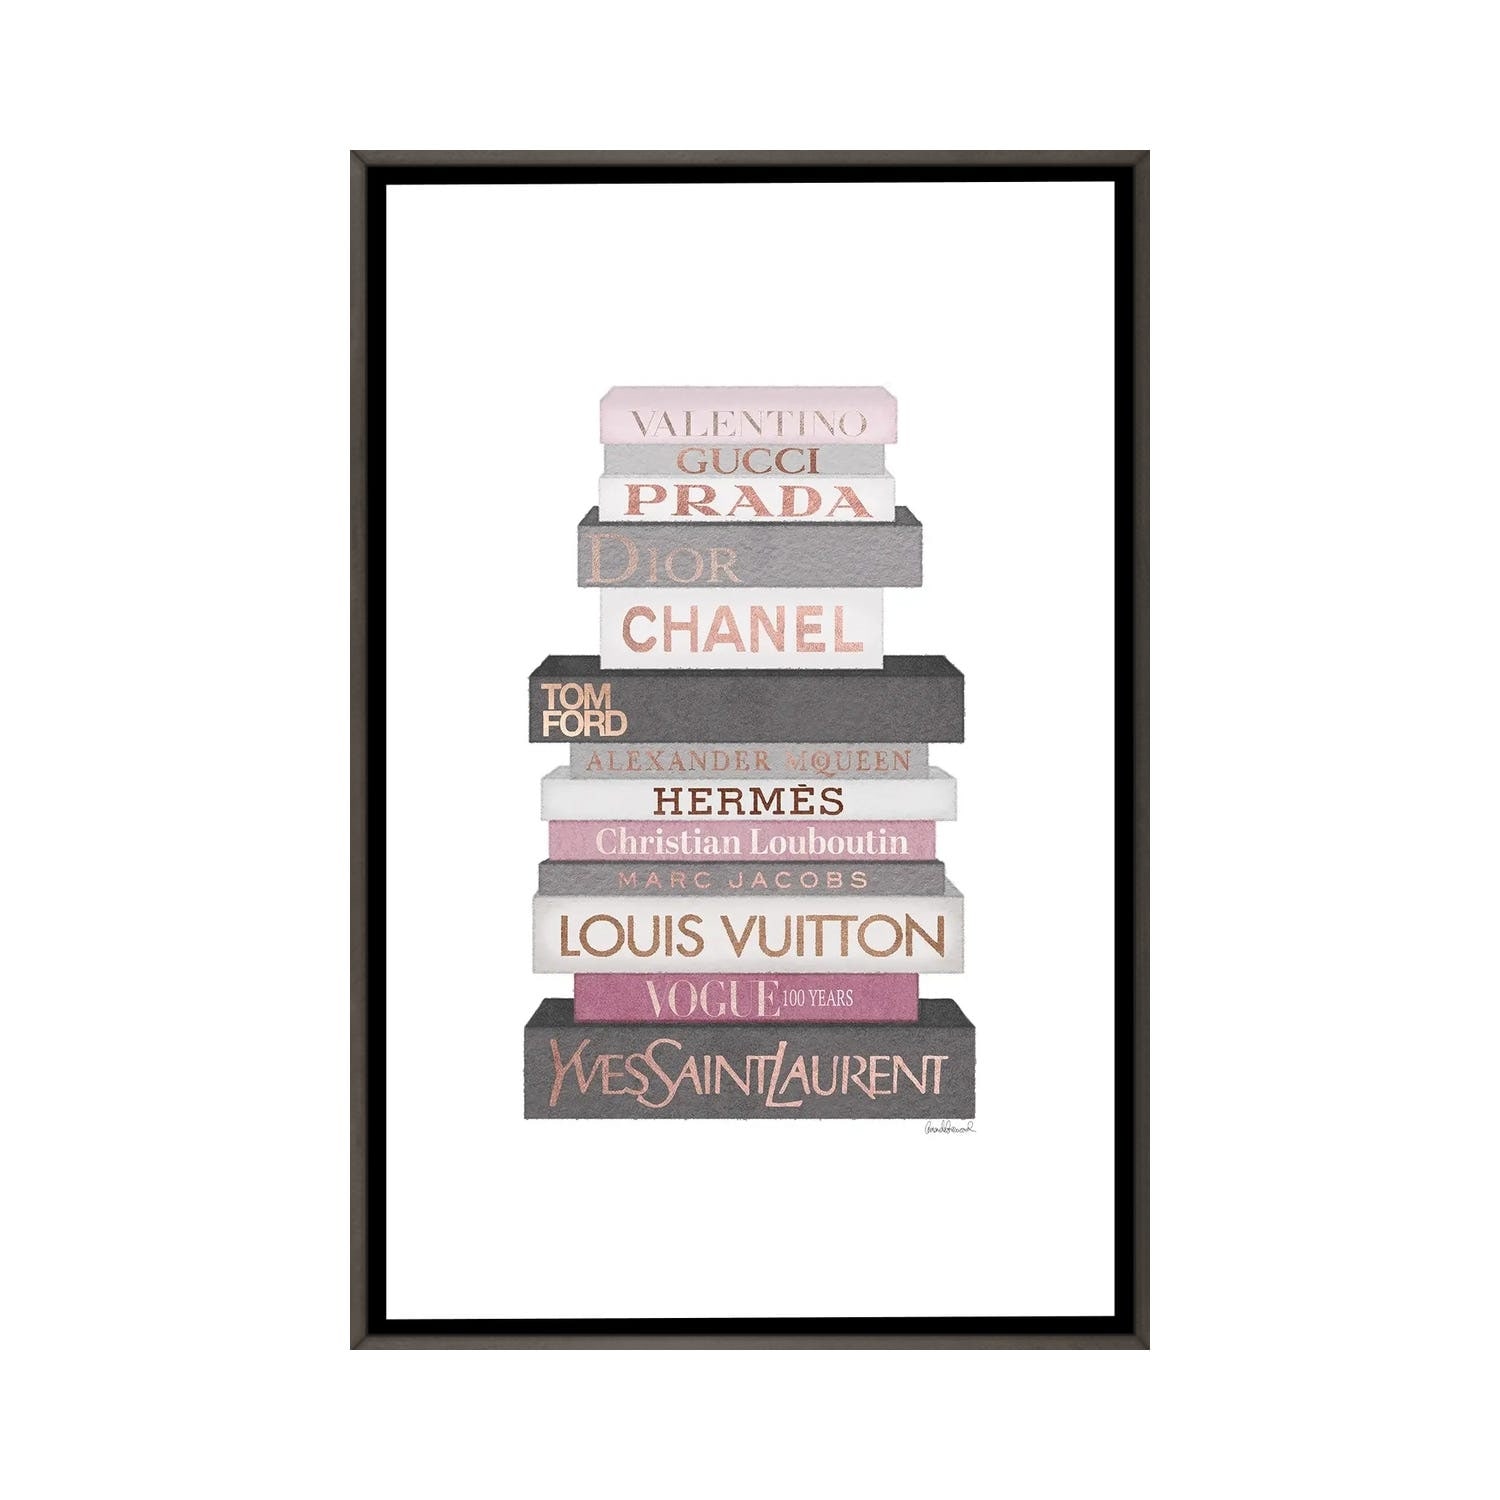 Framed Canvas Art (Gold Floating Frame) - Tall Pink and Silver with Bow Shoes, by Amanda Greenwood ( Fashion > Prada art) - 40x26 in